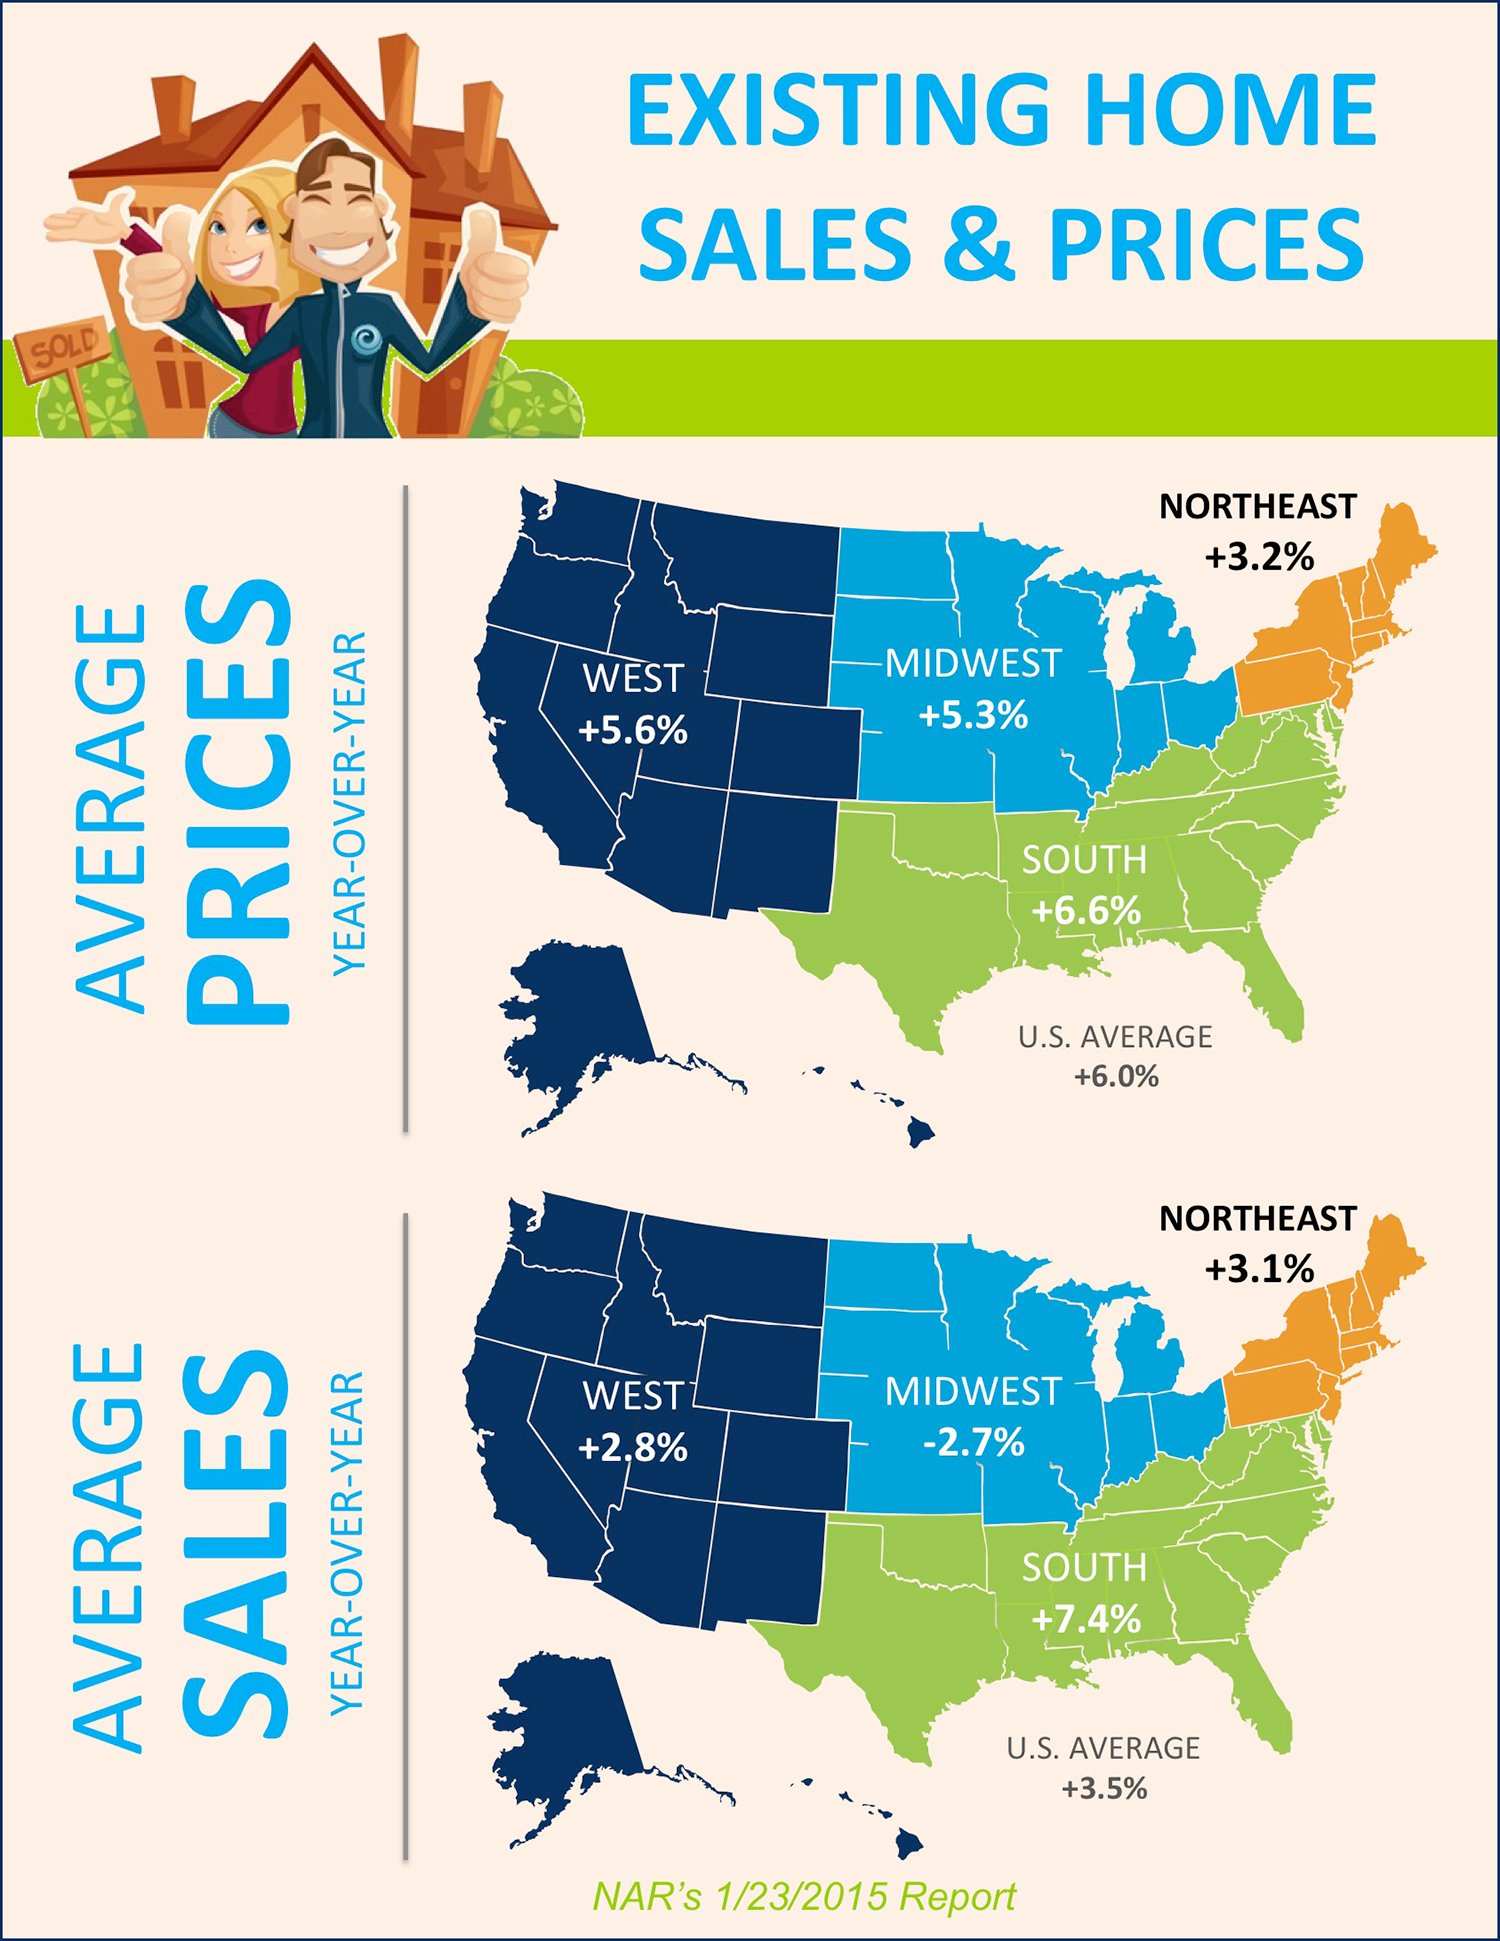 Existing Home Sales & Prices [INFOGRAPHIC] | Simplifying The Market